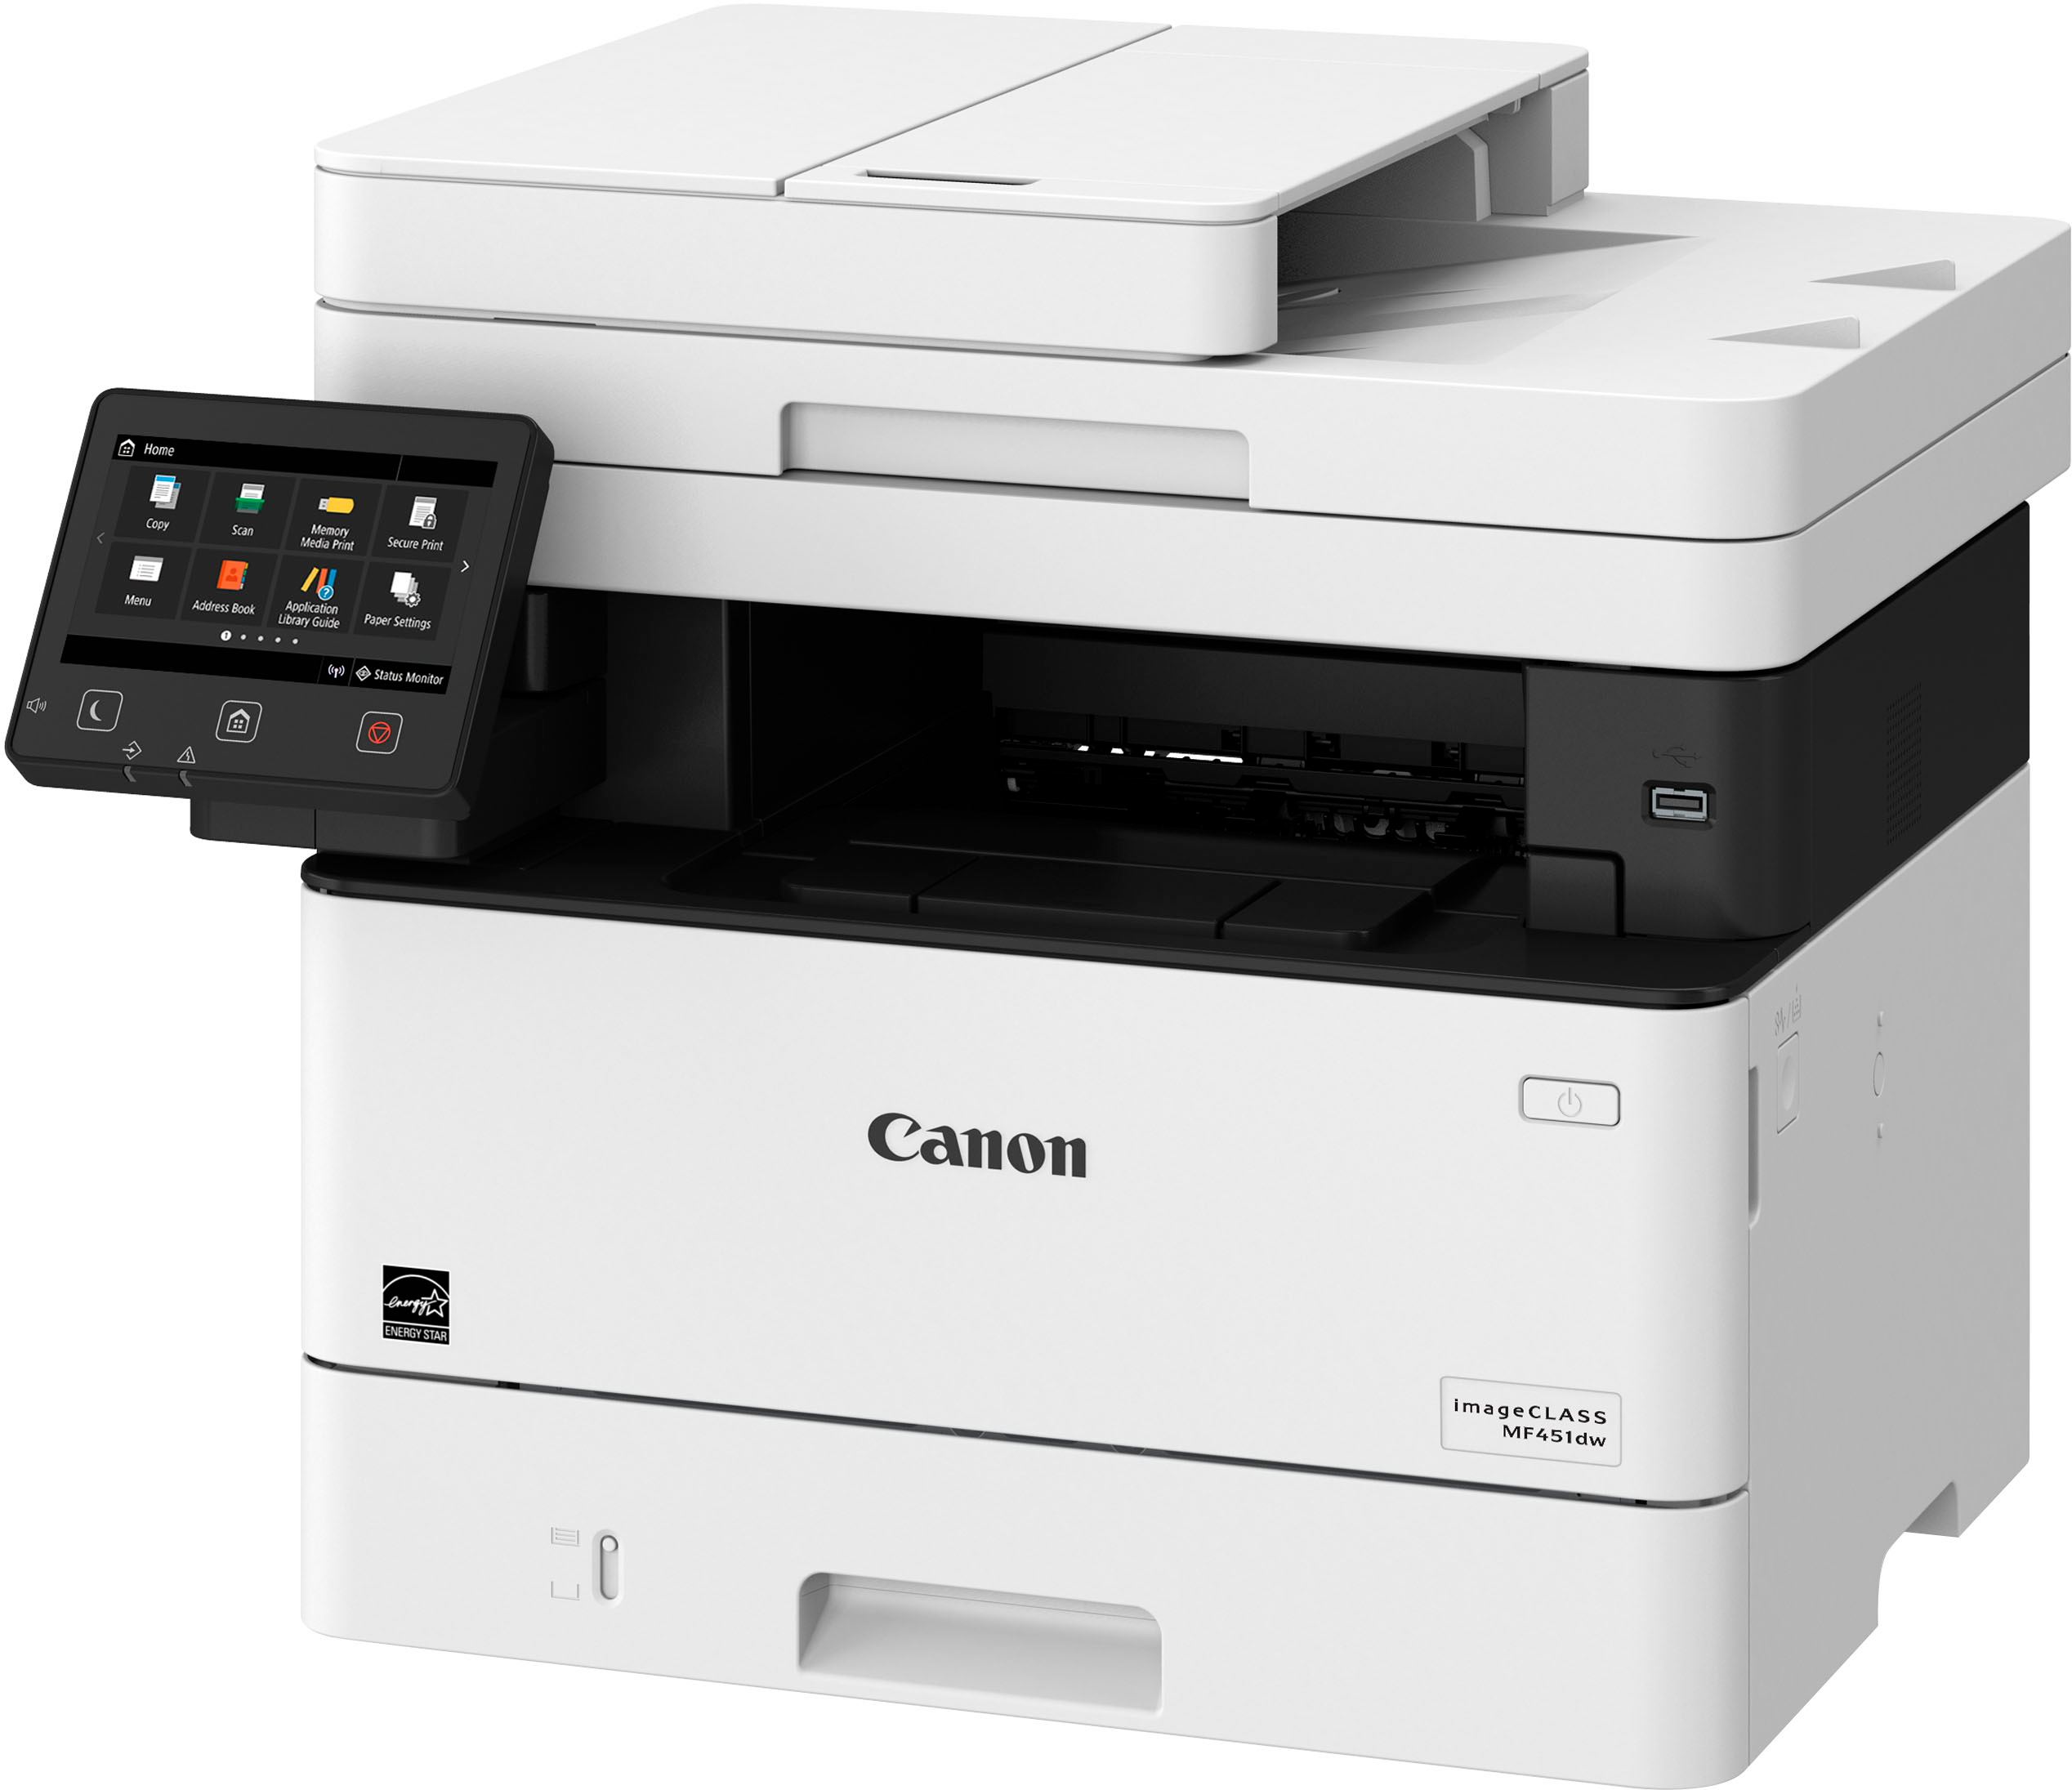 Angle View: Canon - imageCLASS MF451dw Wireless Black-and-White All-In-One Laser Printer - White